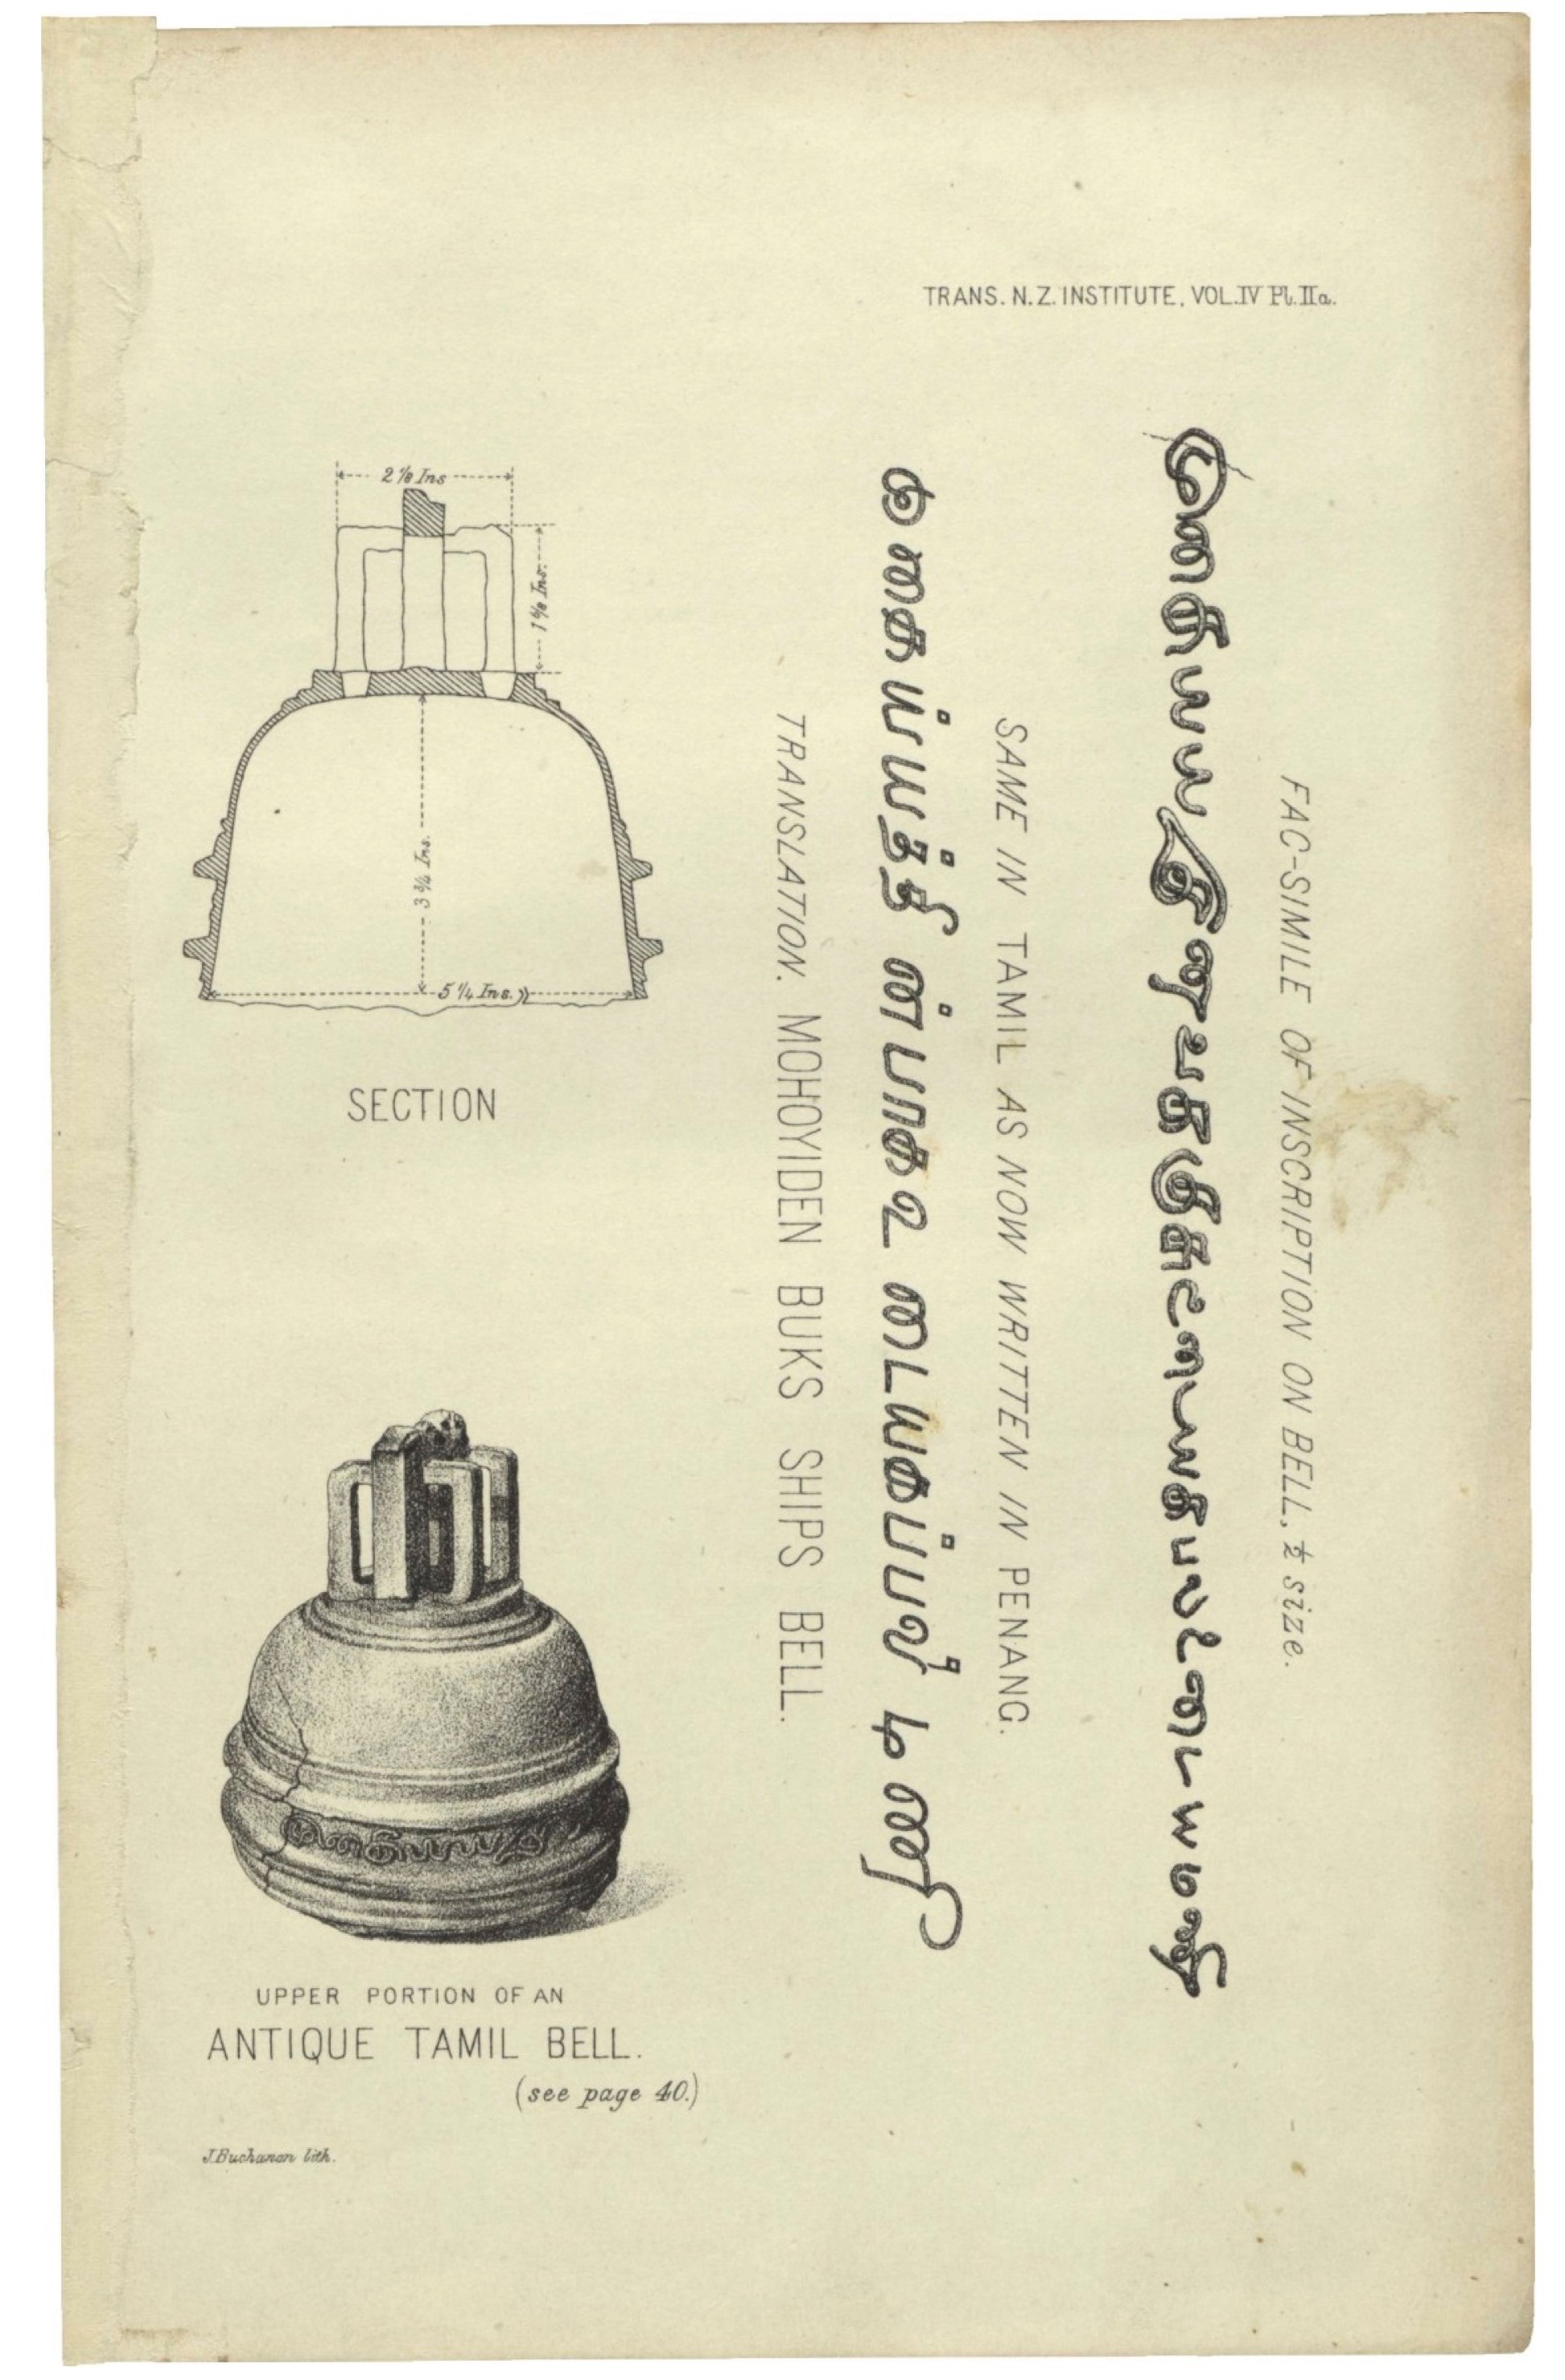 Page from a book showing a drawing of the bell, its cross-section, and a transcription and translation of the engraving.